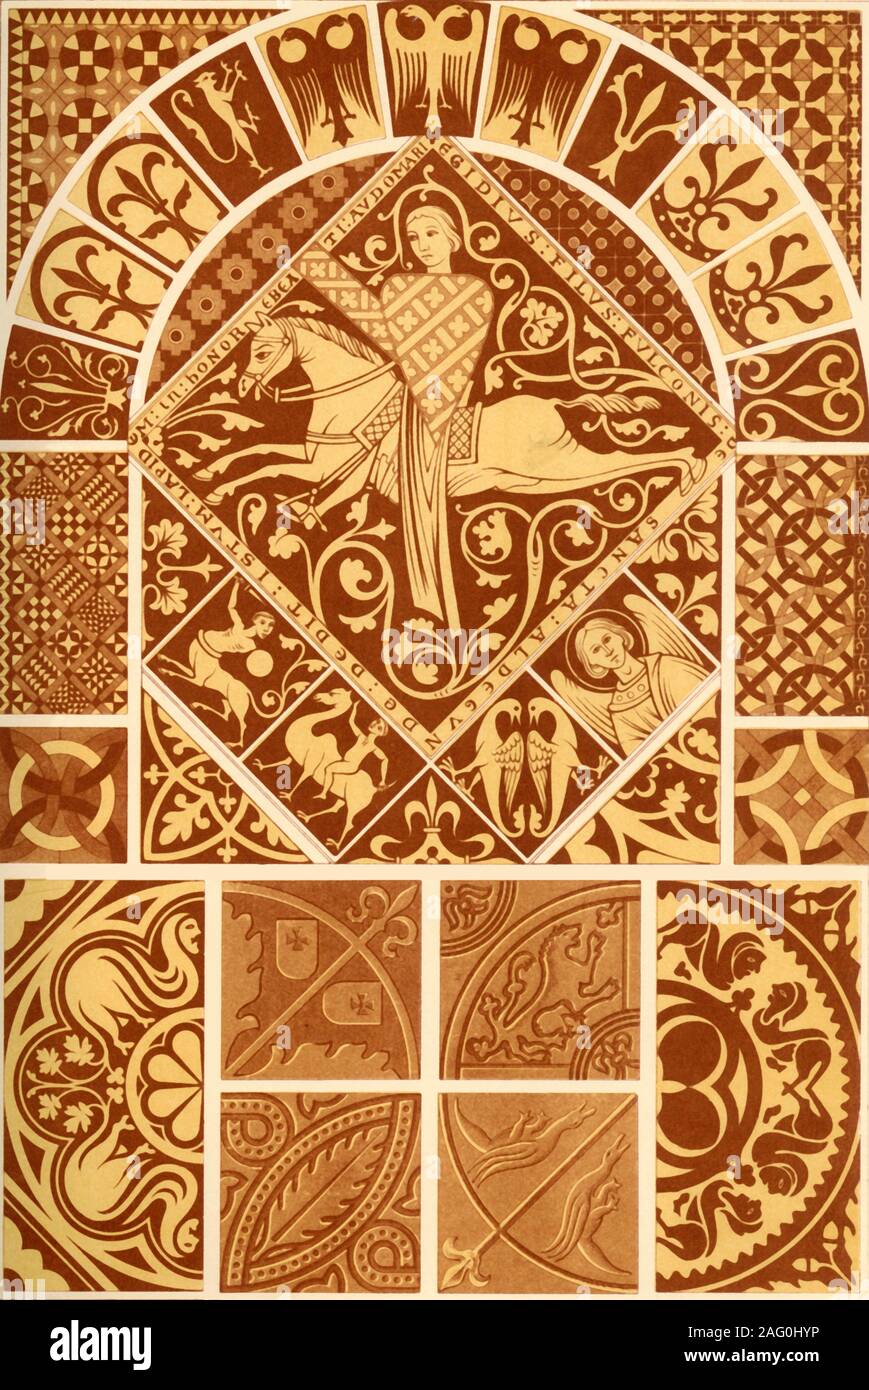 Medieval stone mosaic, (1898). 'Figs 1-8: Engraved stone-flags from the old cathedral at St. Omer, 13th century (ground brown, interior design of horse and horseman filled up with red). Figs 9 and 10: Mosaic floors of burnt clay, enamelled, from a collection at Dresden (black and red centres with white edging) 13th century. Figs 11 and 12: Mosaic floors of burnt clay, enamelled, from the cloister-church Colombe-les-Sens (red, black and yellow), 12th century. Figs 13 and 14: Mosaic floors of burnt clay, enamelled, from the abbey-church at St. Denis (red, black and yellow), 12th century. Figs 15 Stock Photo